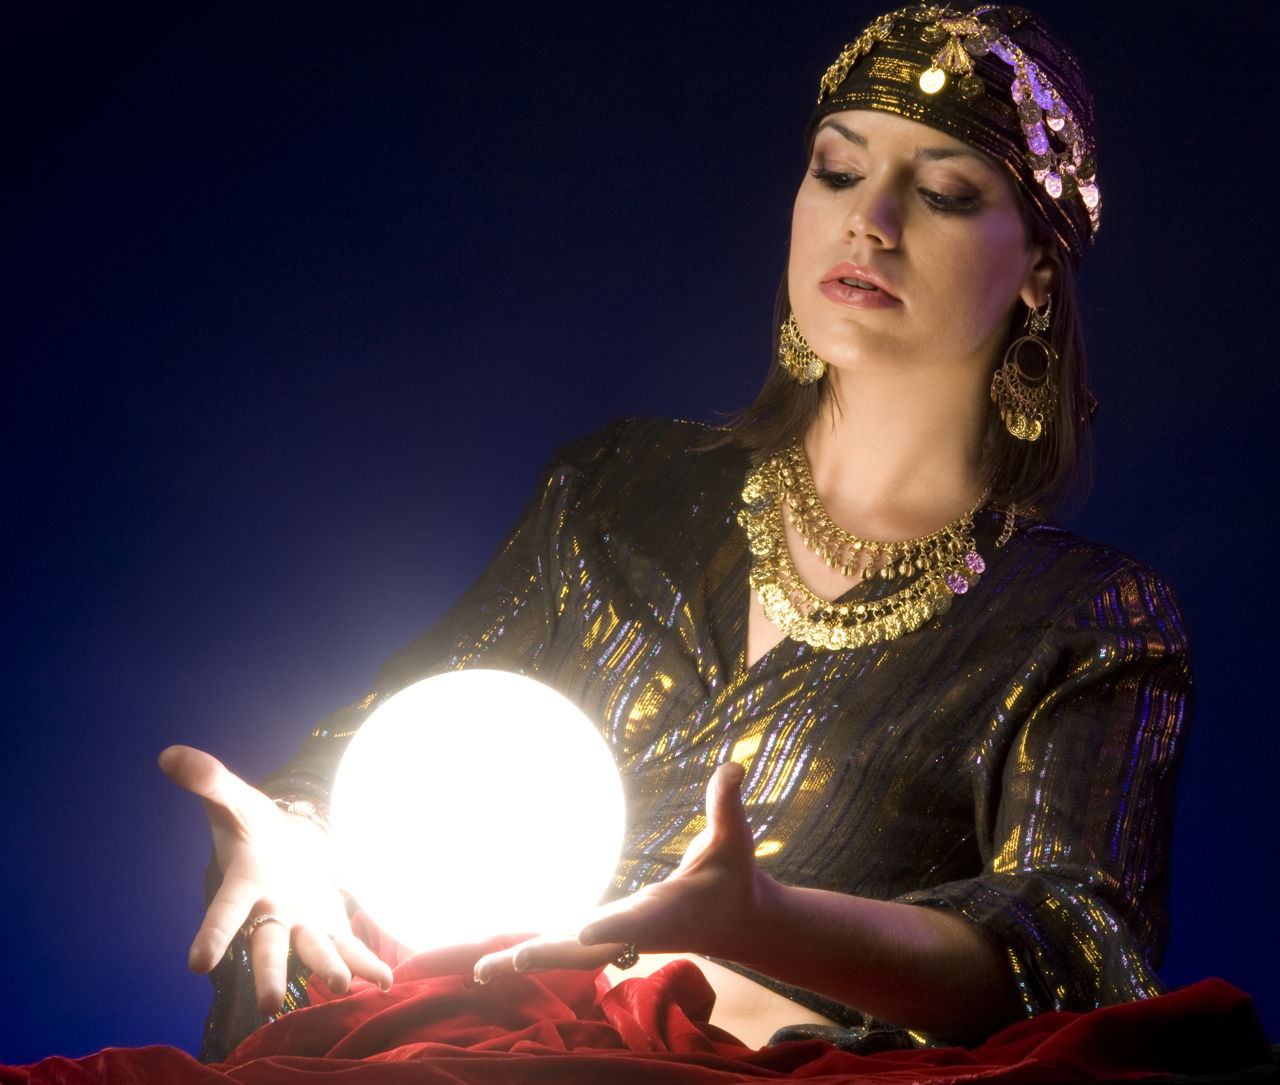 Ask the Crystal Ball - Get Answers to Your Questions - Mysticurious